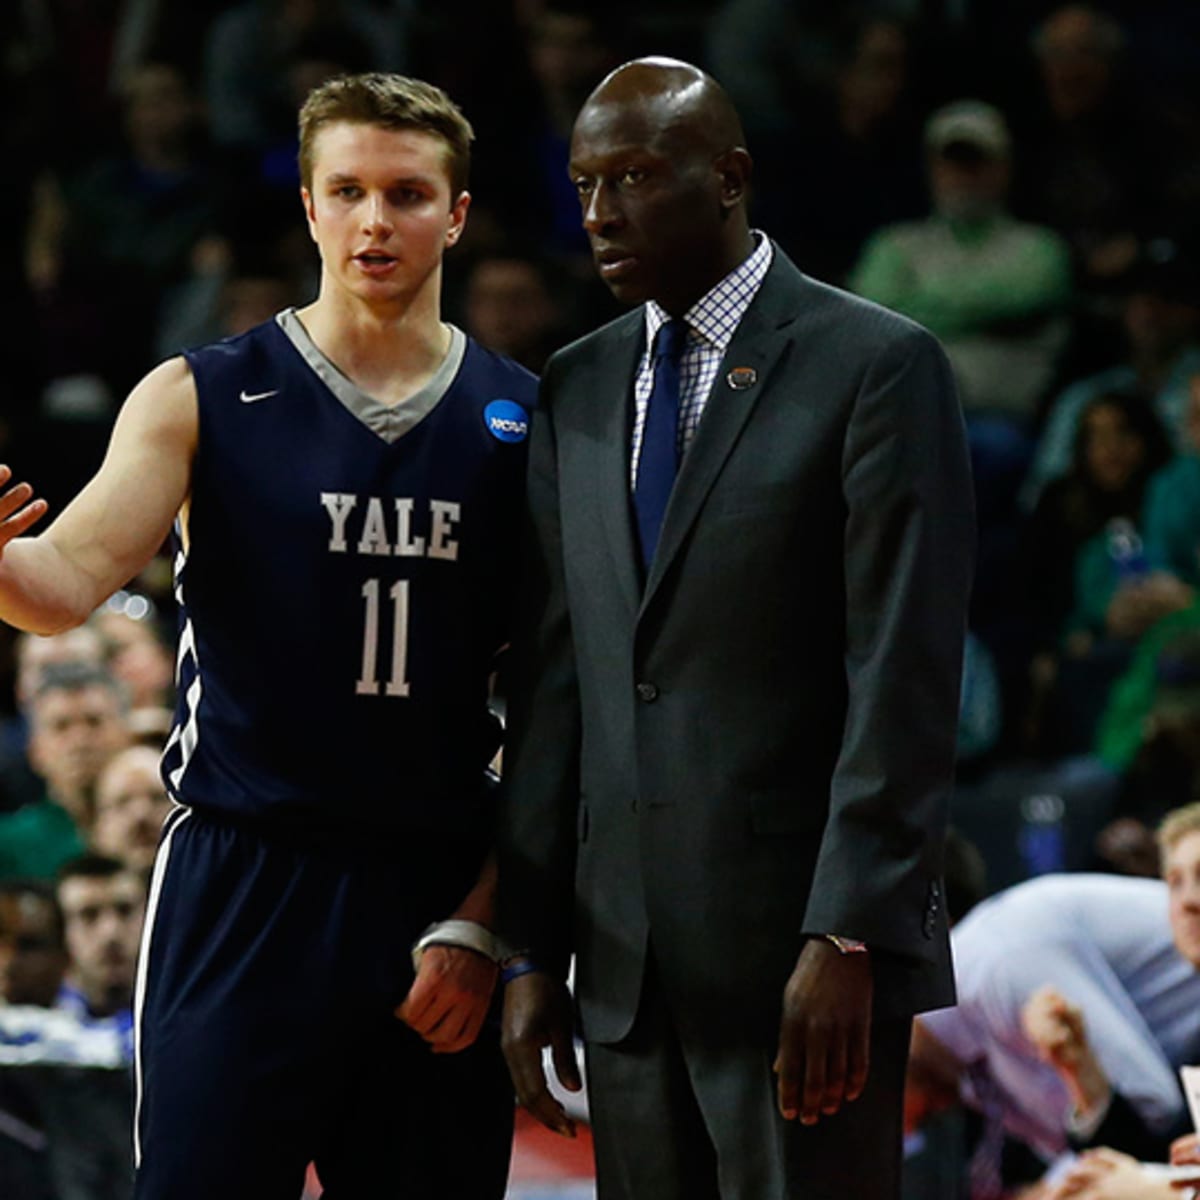 Amid controversy, Yale wins first NCAA tournament game in team history -  Sports Illustrated